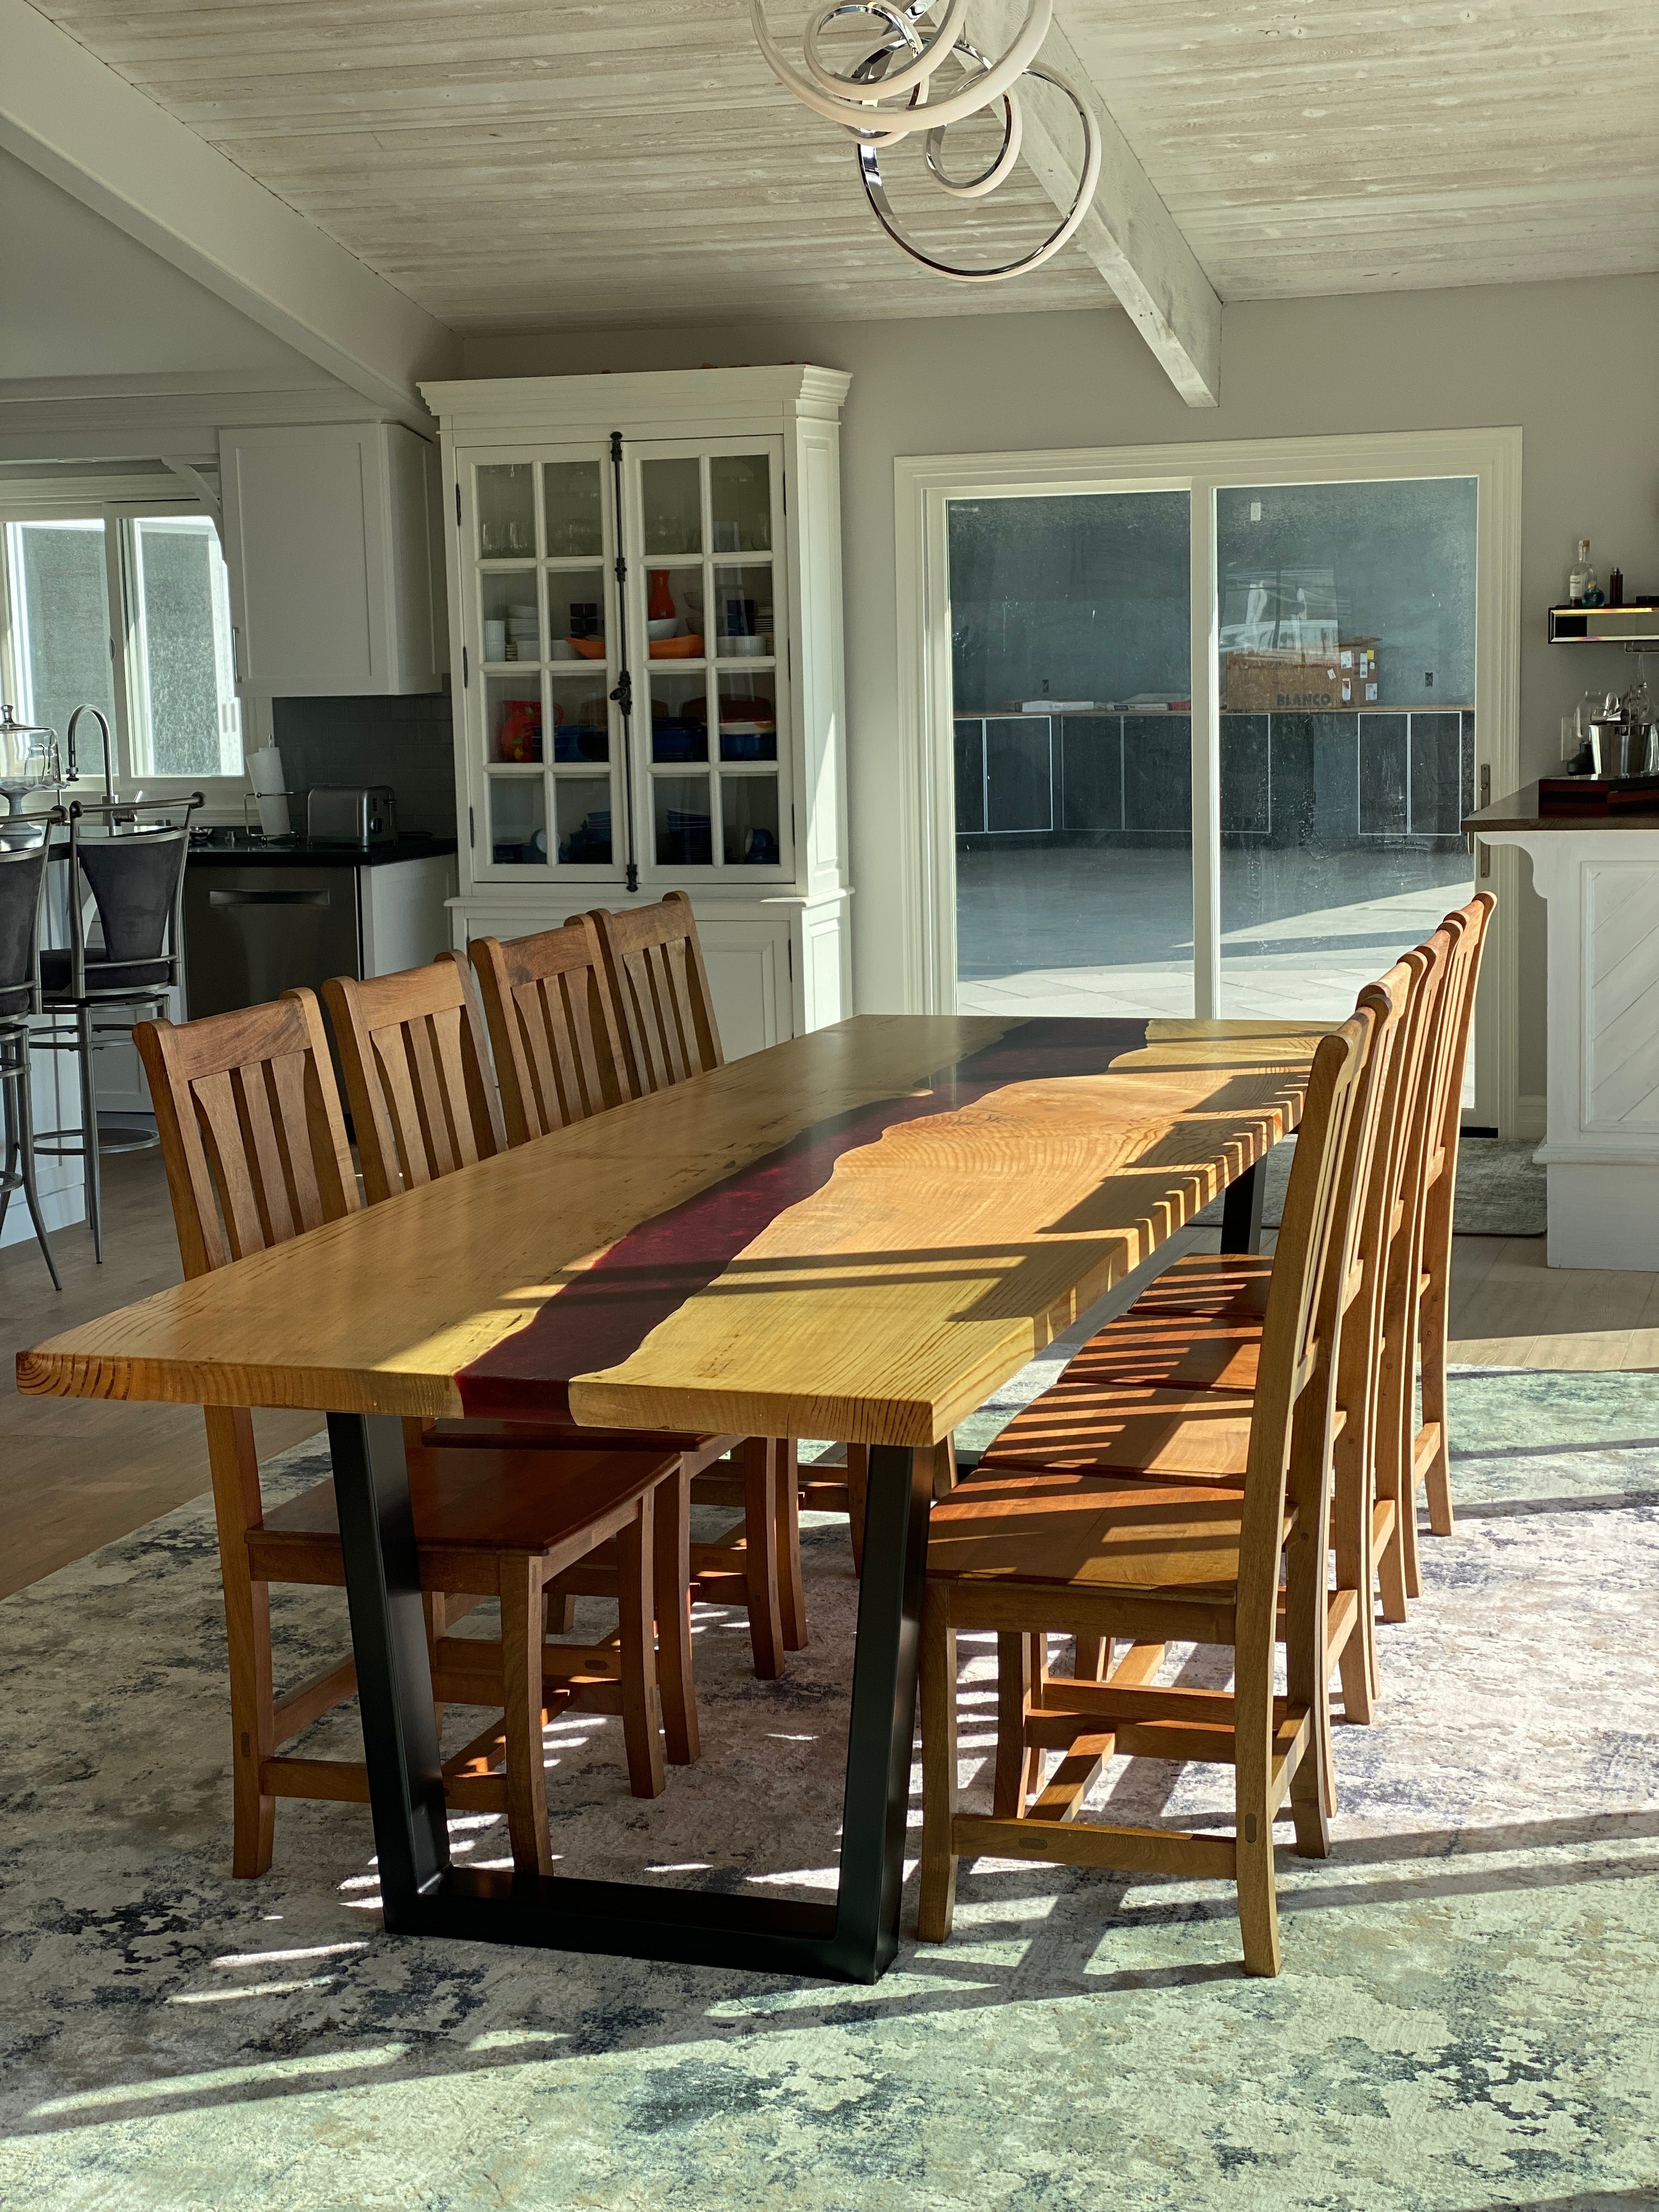 custom dining table - Old Fashioned Lumber